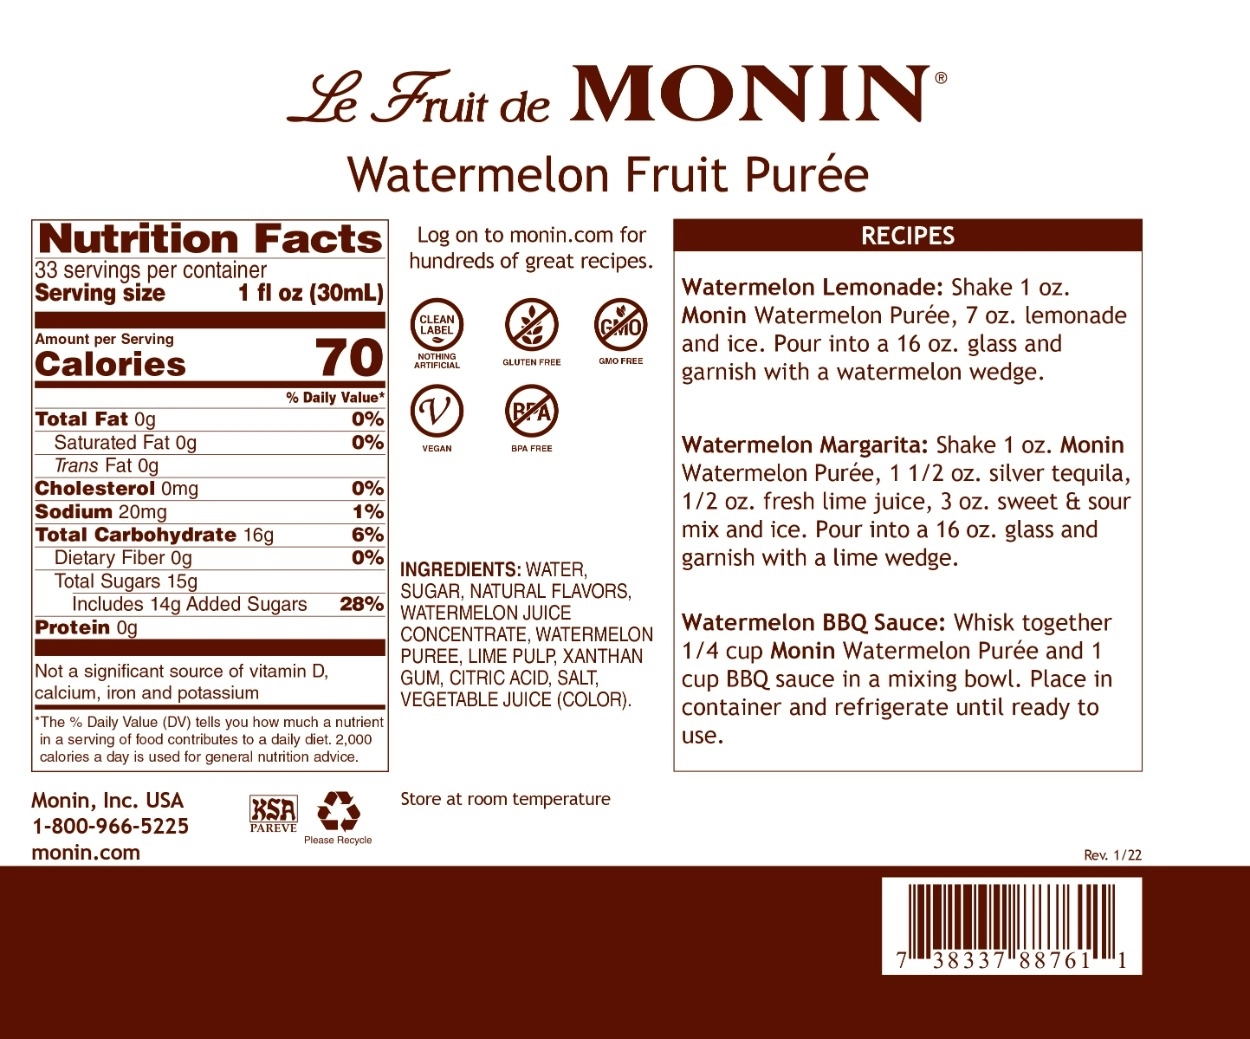 Monin Watermelon Fruit Puree nutrition facts and recipe label